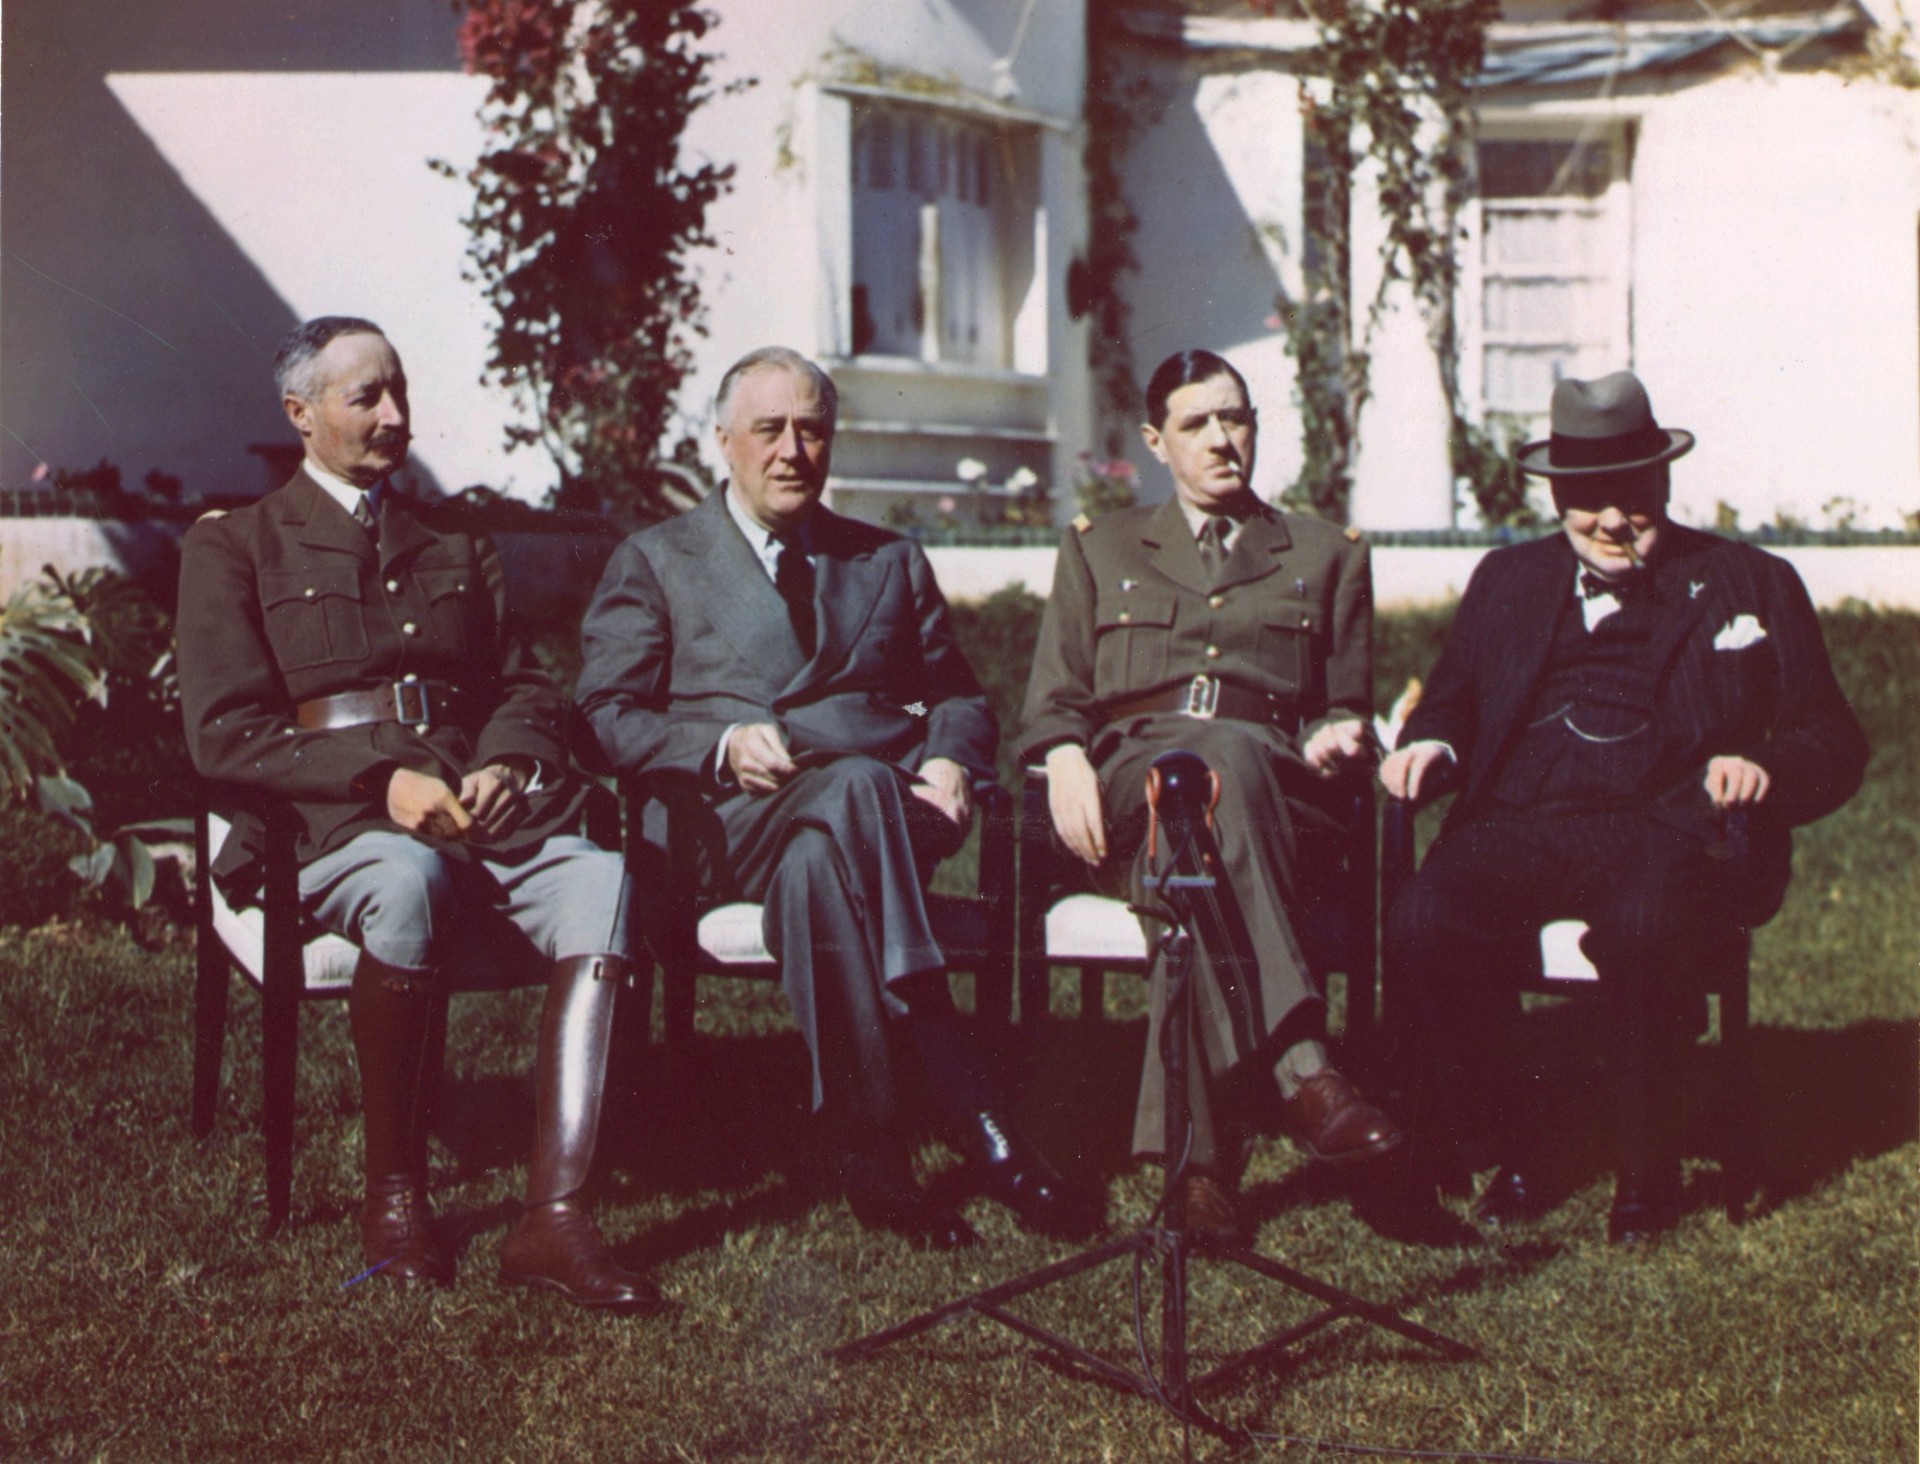 Giraud, Roosevelt, de Gaulle and Churchill pictured at Casablanca Conference